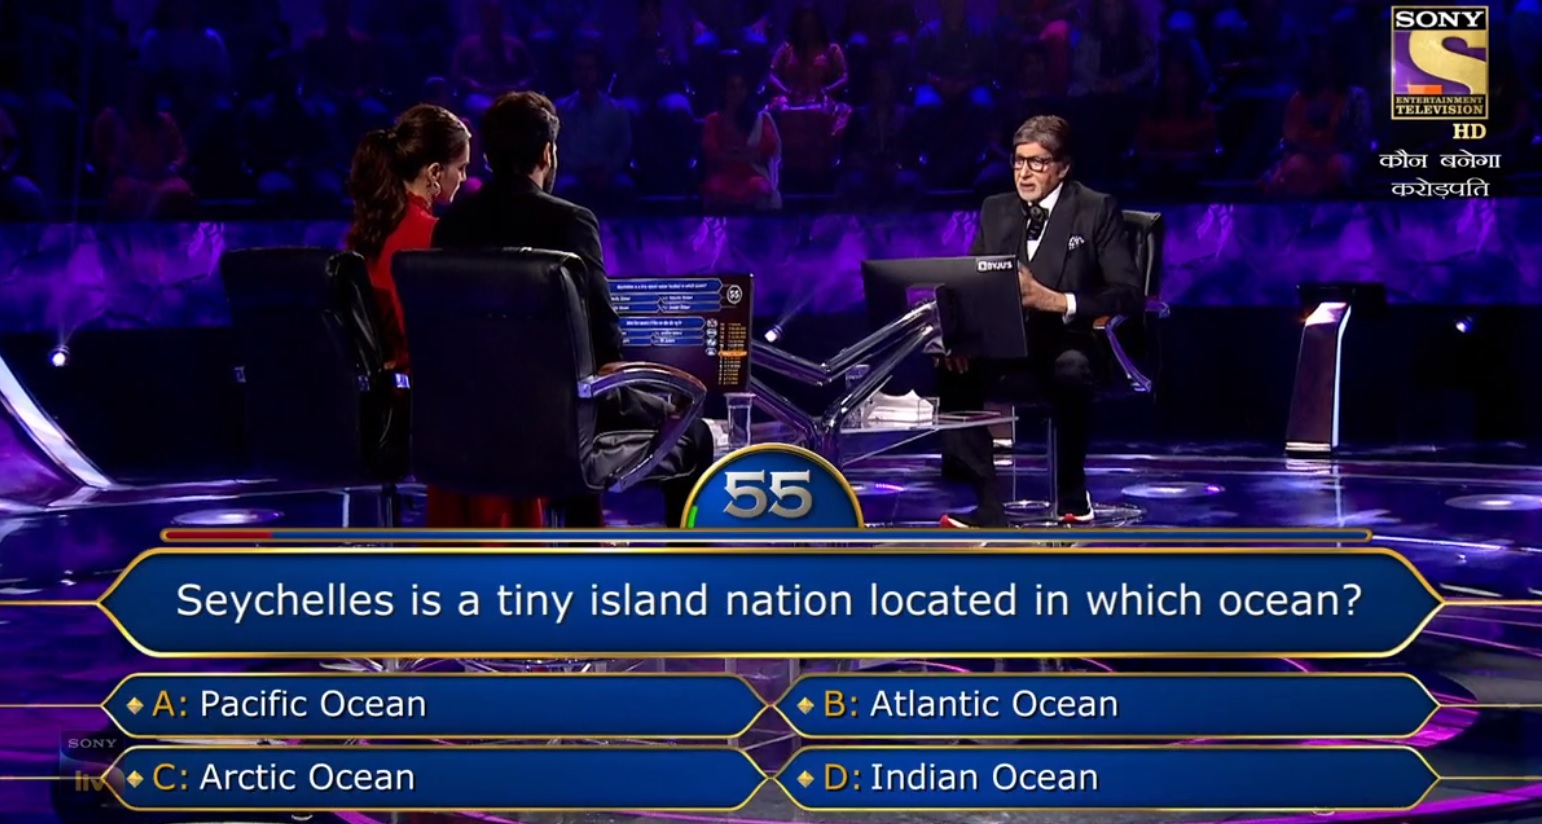 Ques : Seychelles is a tiny island nation located in which ocean?